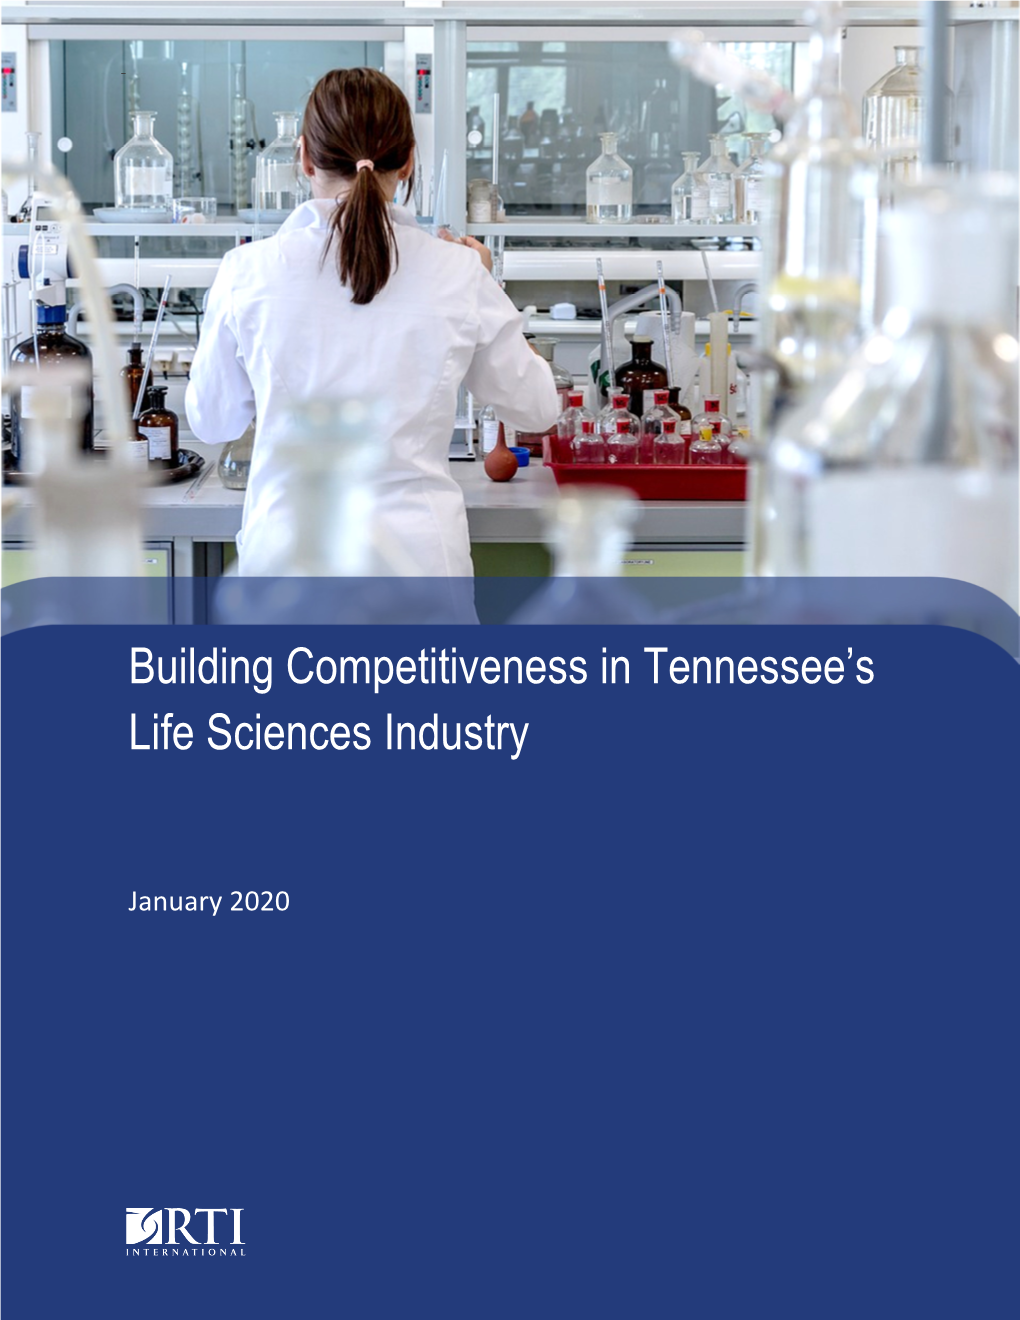 Building Competitiveness in Tennessee's Life Sciences Industry